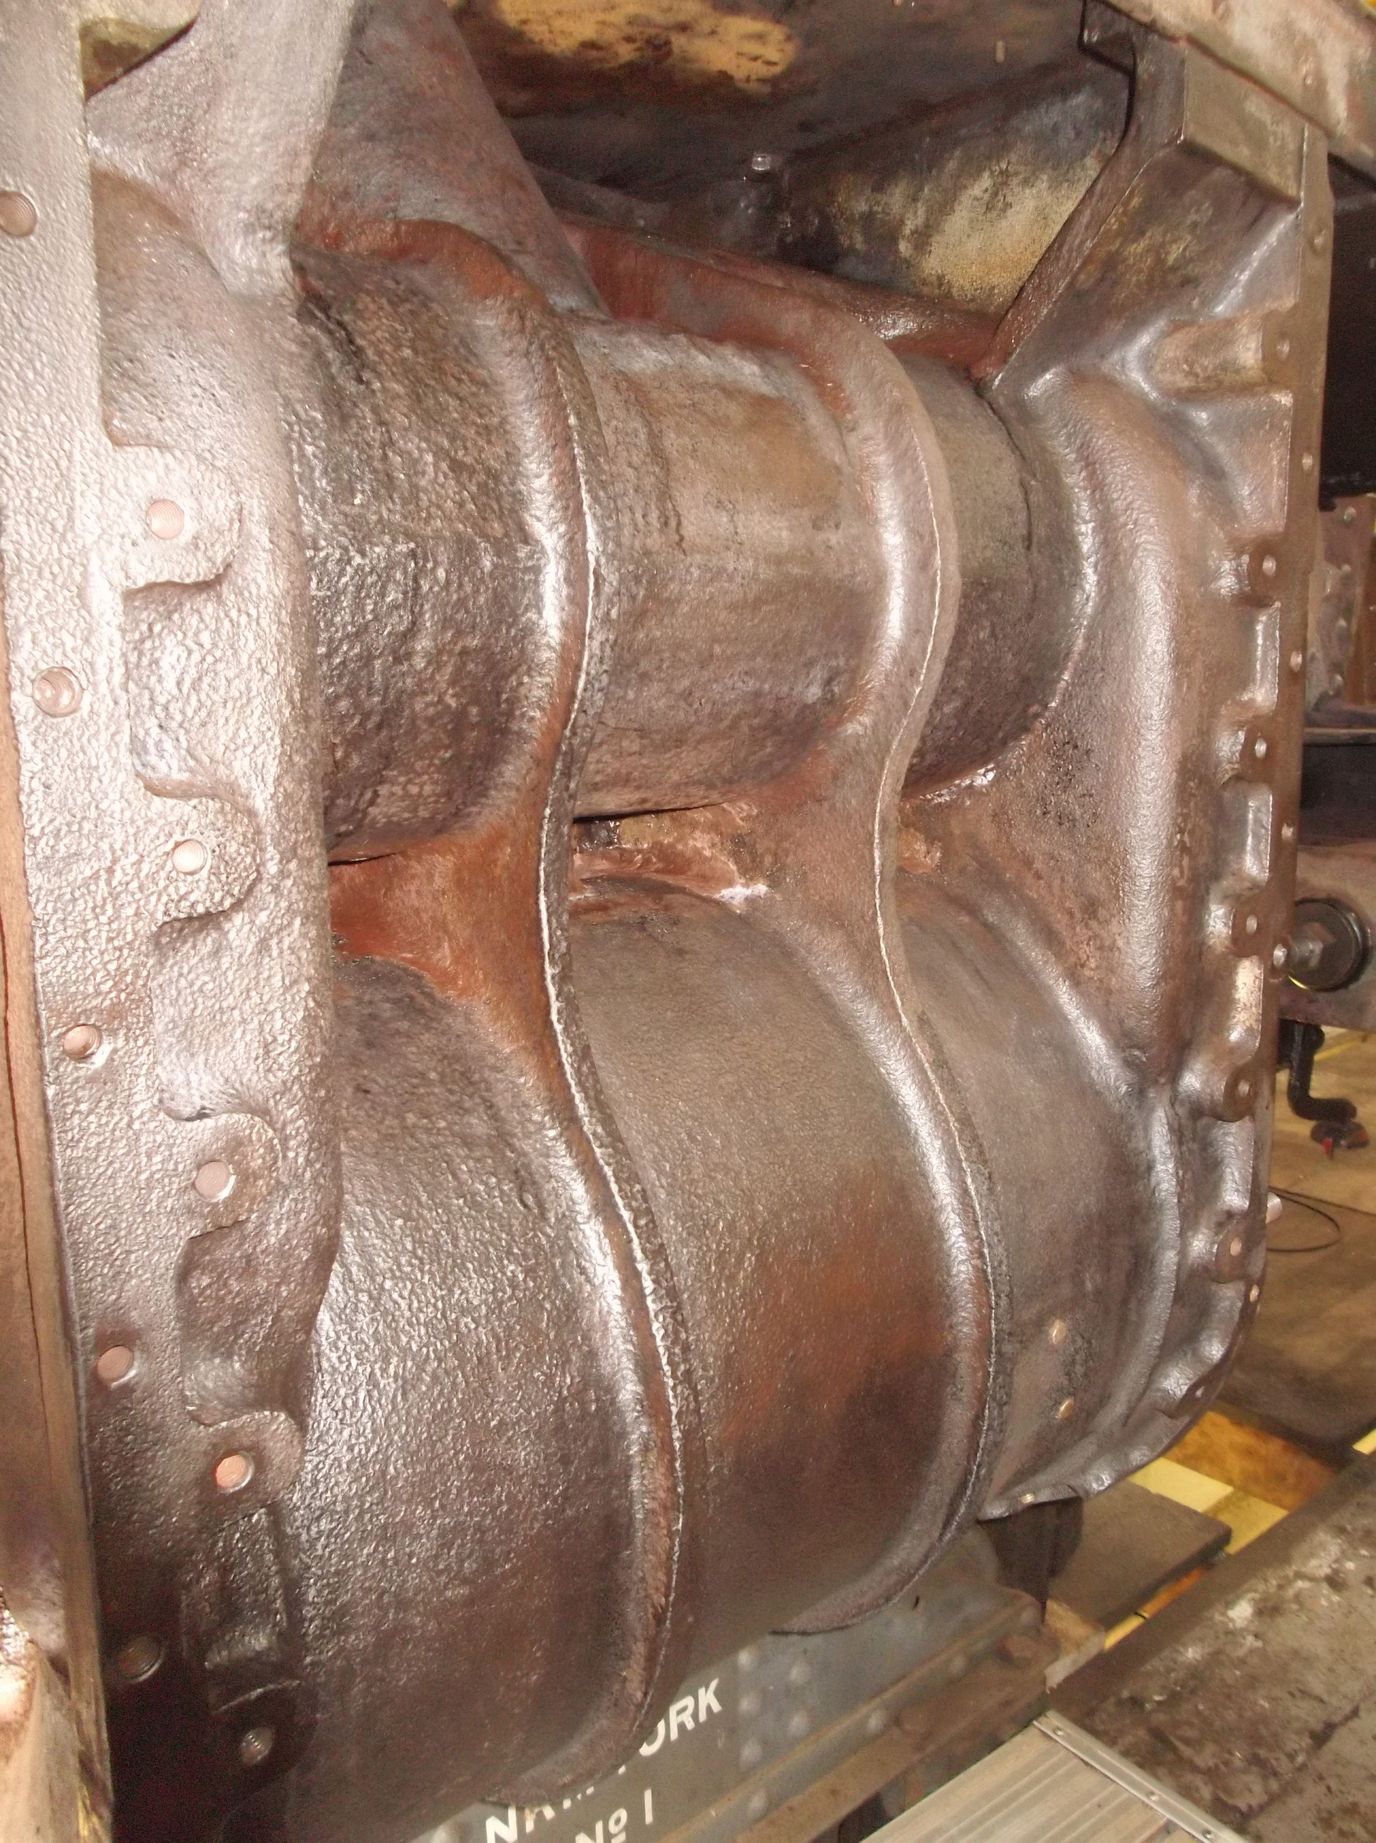 The outstanding finish achieved on the right hand cylinder casting after hours of volunteer Engineering Team effort. This allows a thorough inspection of the component and its fasteners.